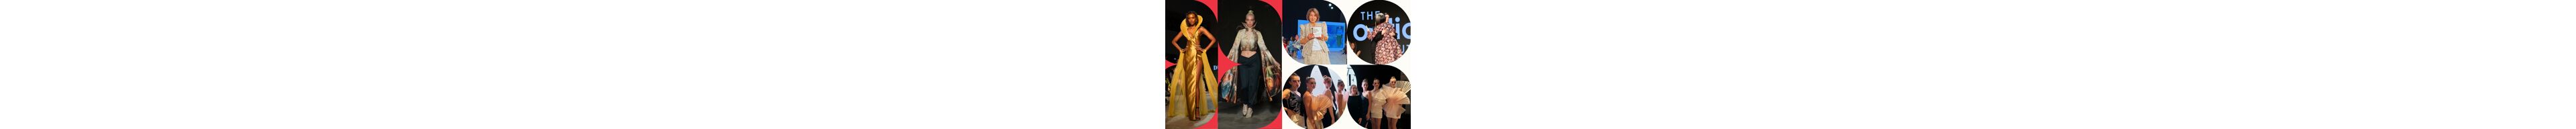 A collage showcasing the dynamic range of fashion design, from elegant to edgy, at a vibrant runway event.